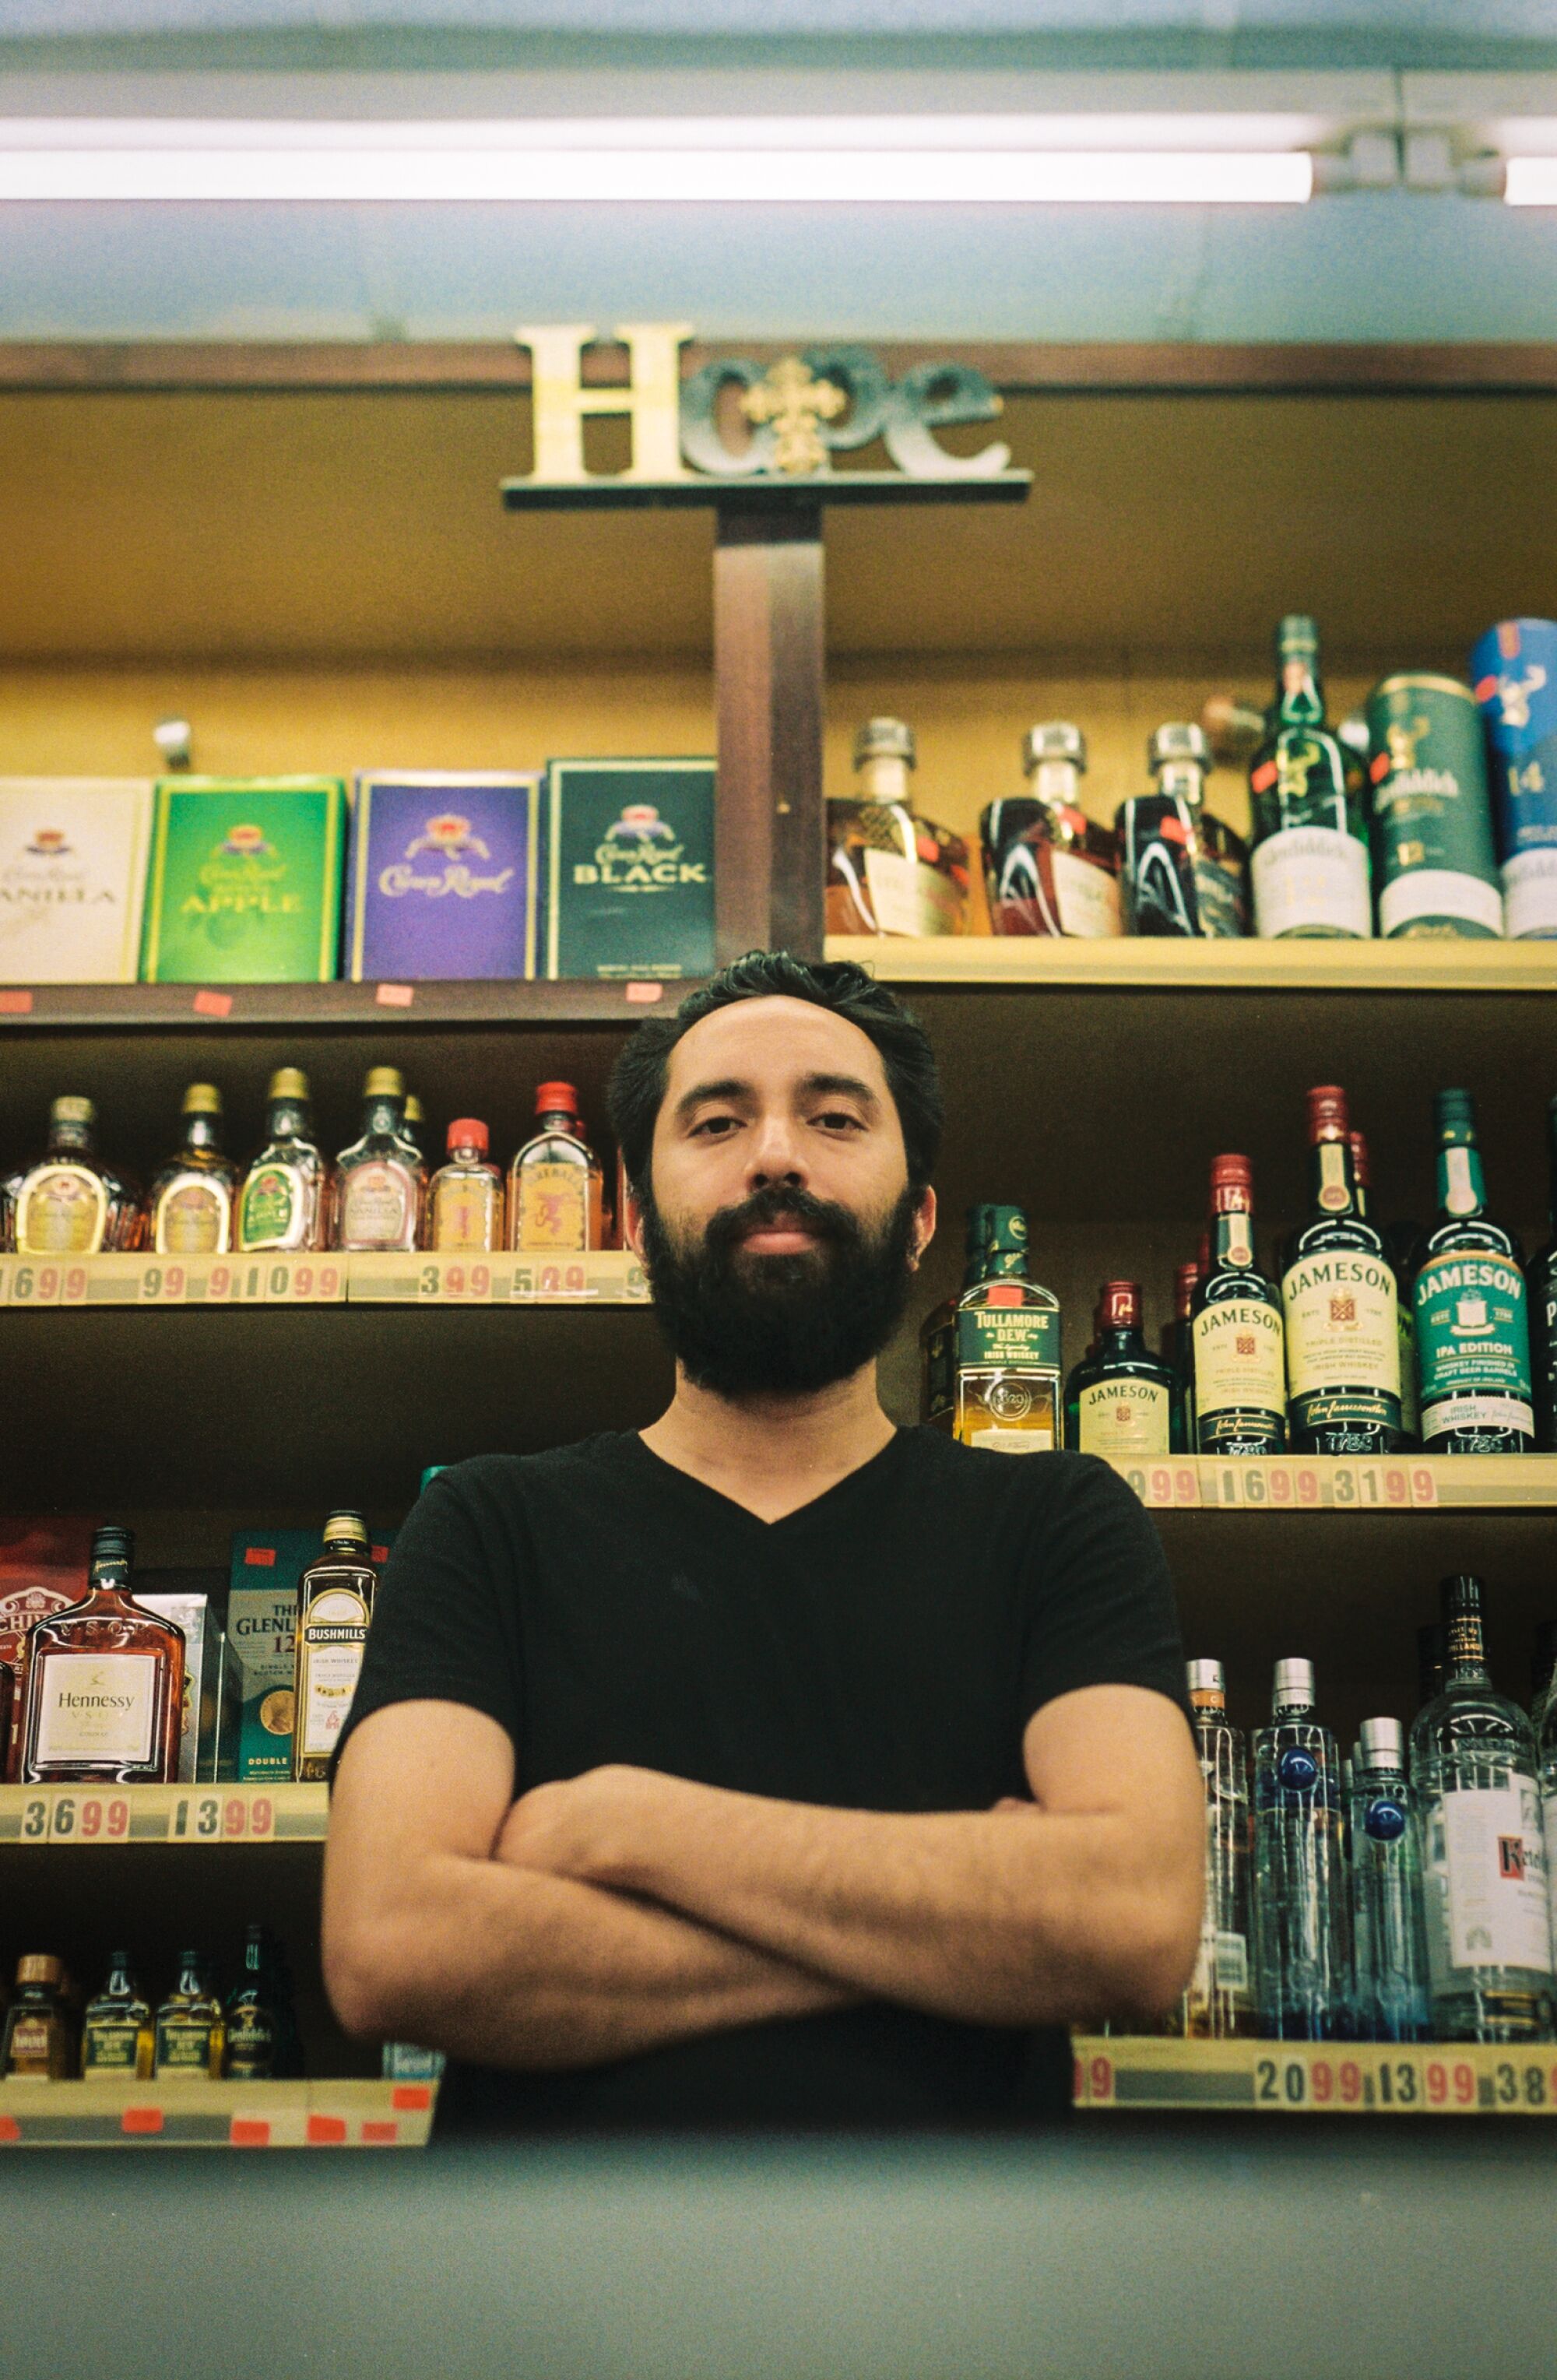 Rubal Singh, the face of Hope's Liquor, stands behind the counter.